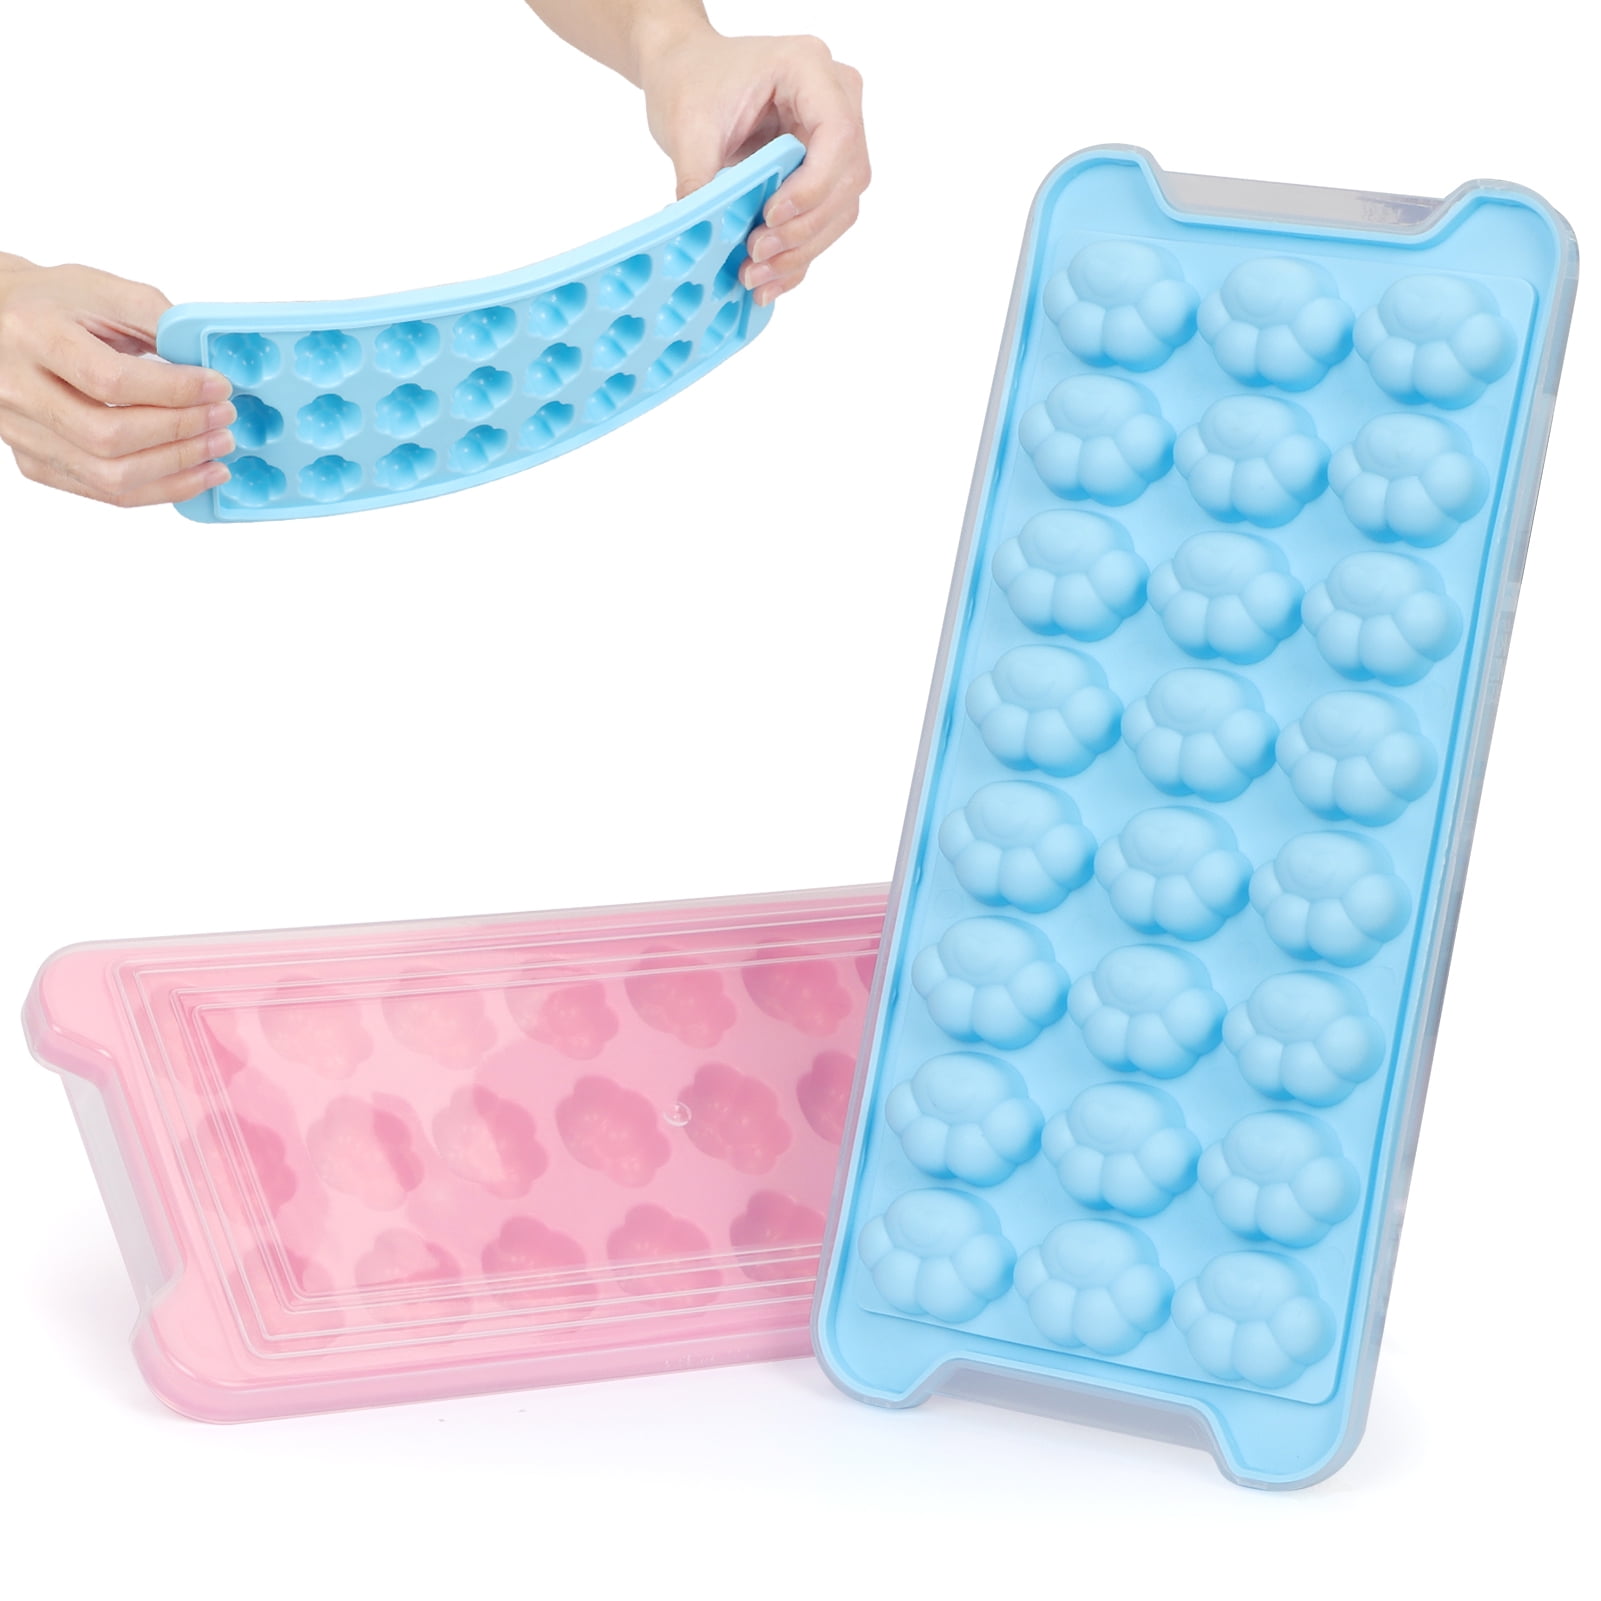 Ice Cube Tray 2 Pack, Cute Cat Shaped Ice Cube Mold,Fun Ice Tray for Make  ice cube,Candy, Chocolate Mold, Easy Release, BPA free, Dishwasher Safe